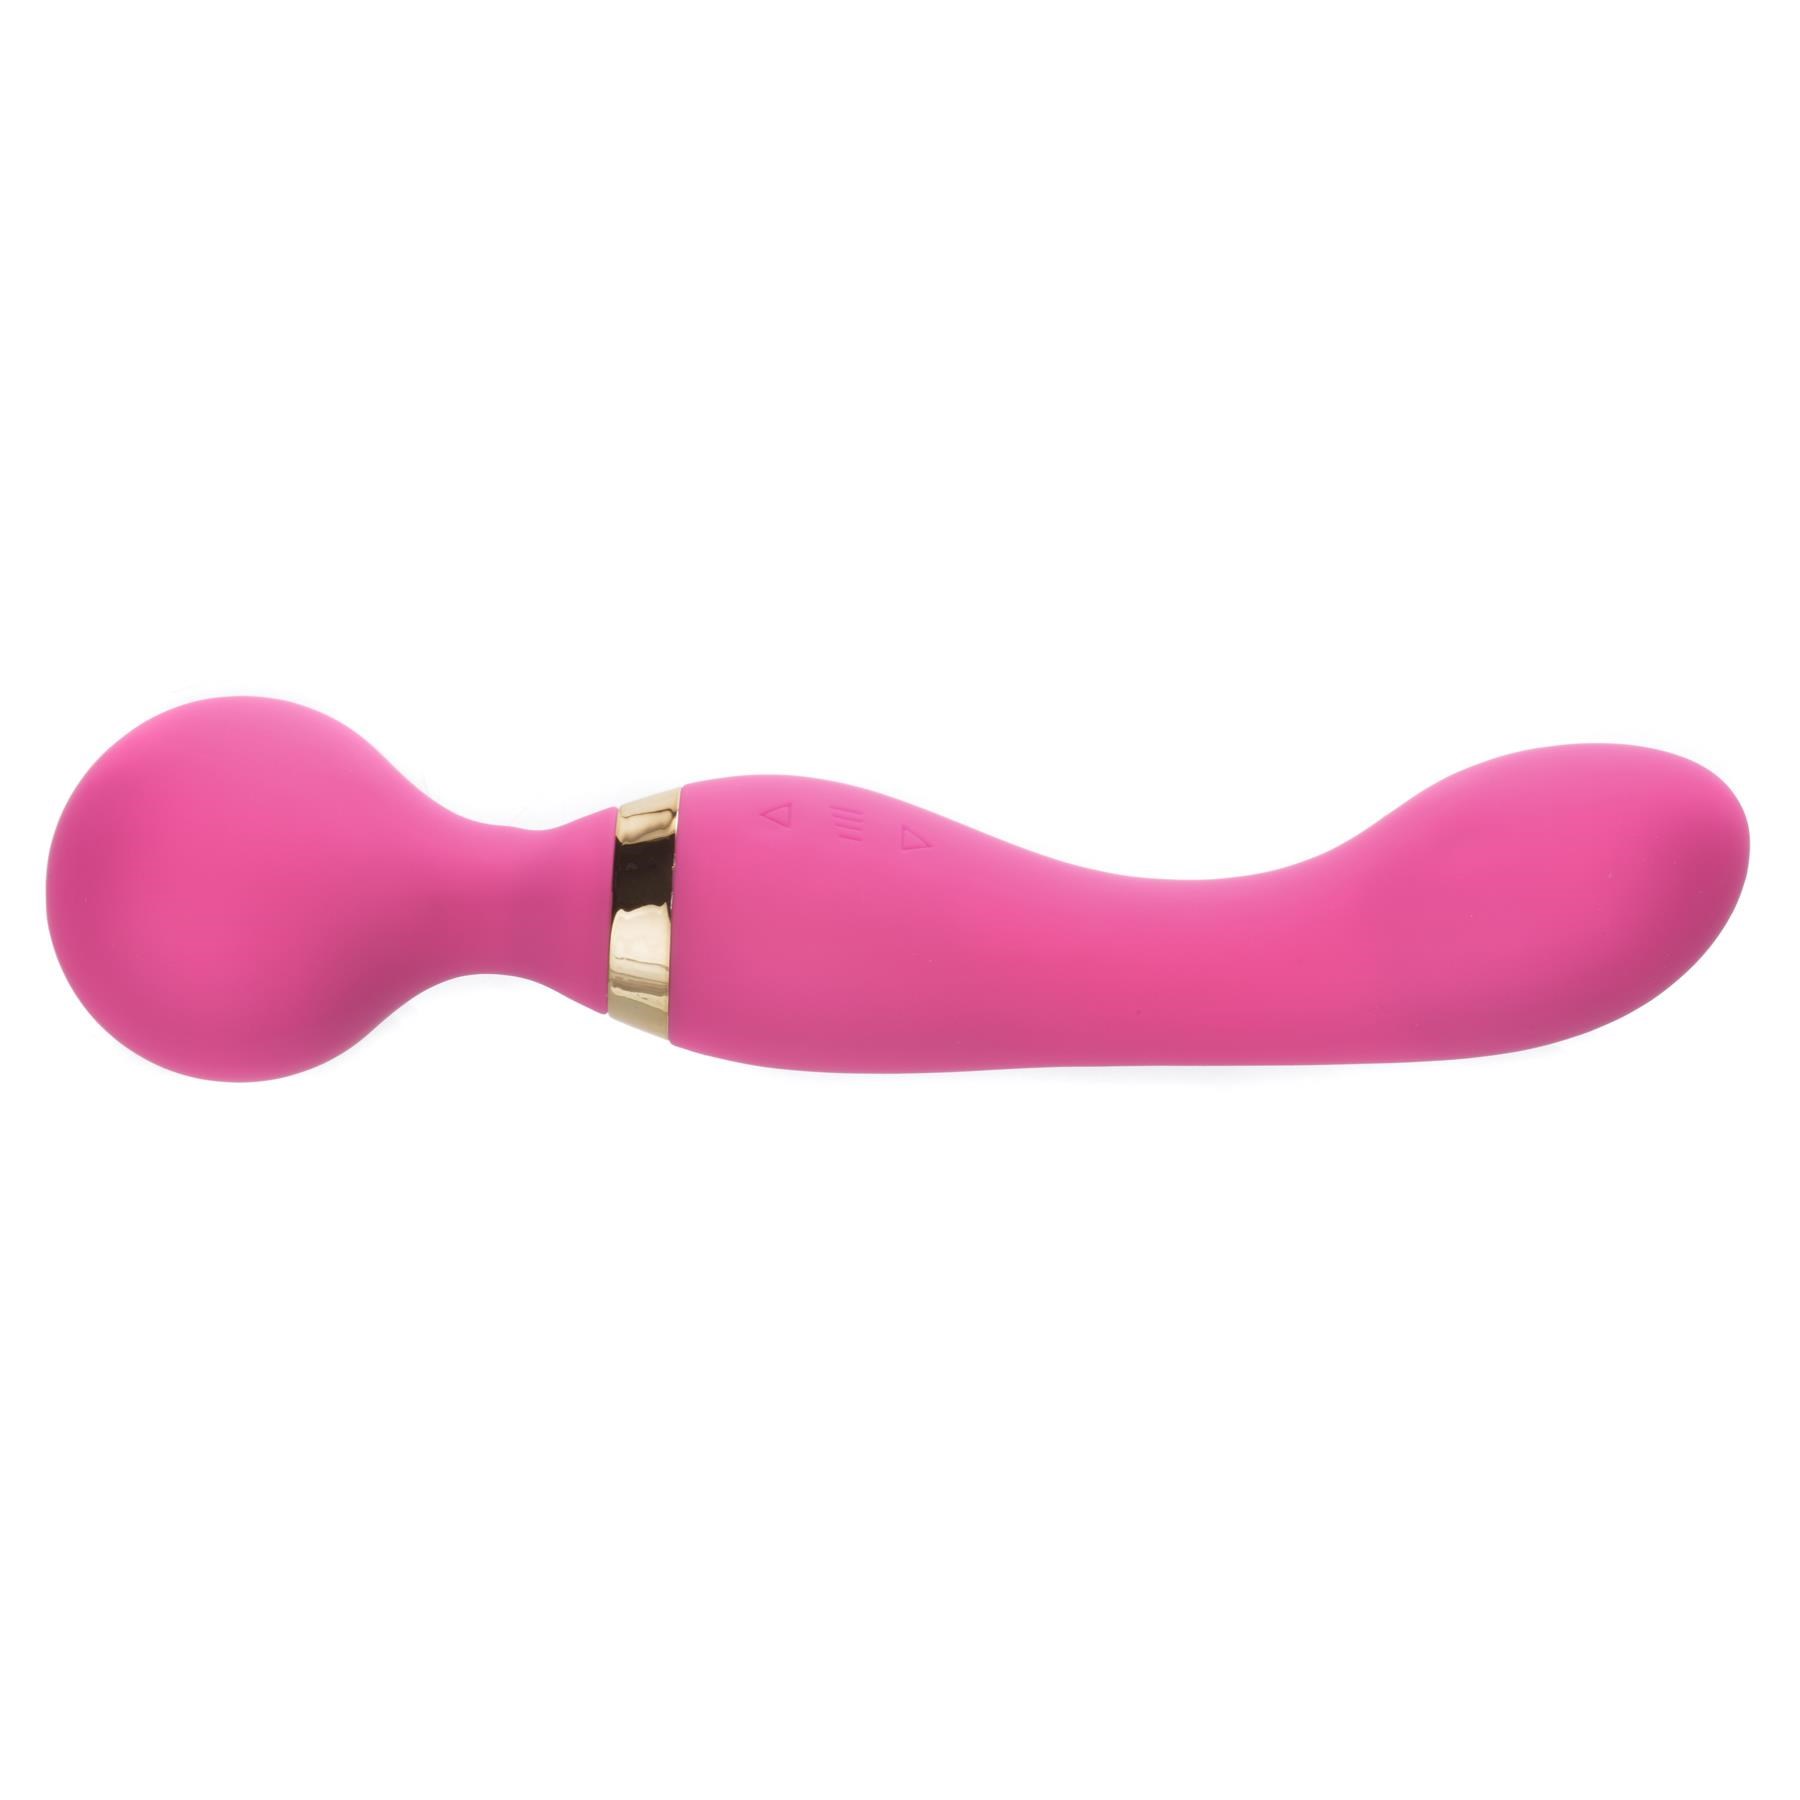 Dual Pleasures Rechargeable Wand Massager- Product Shot #2